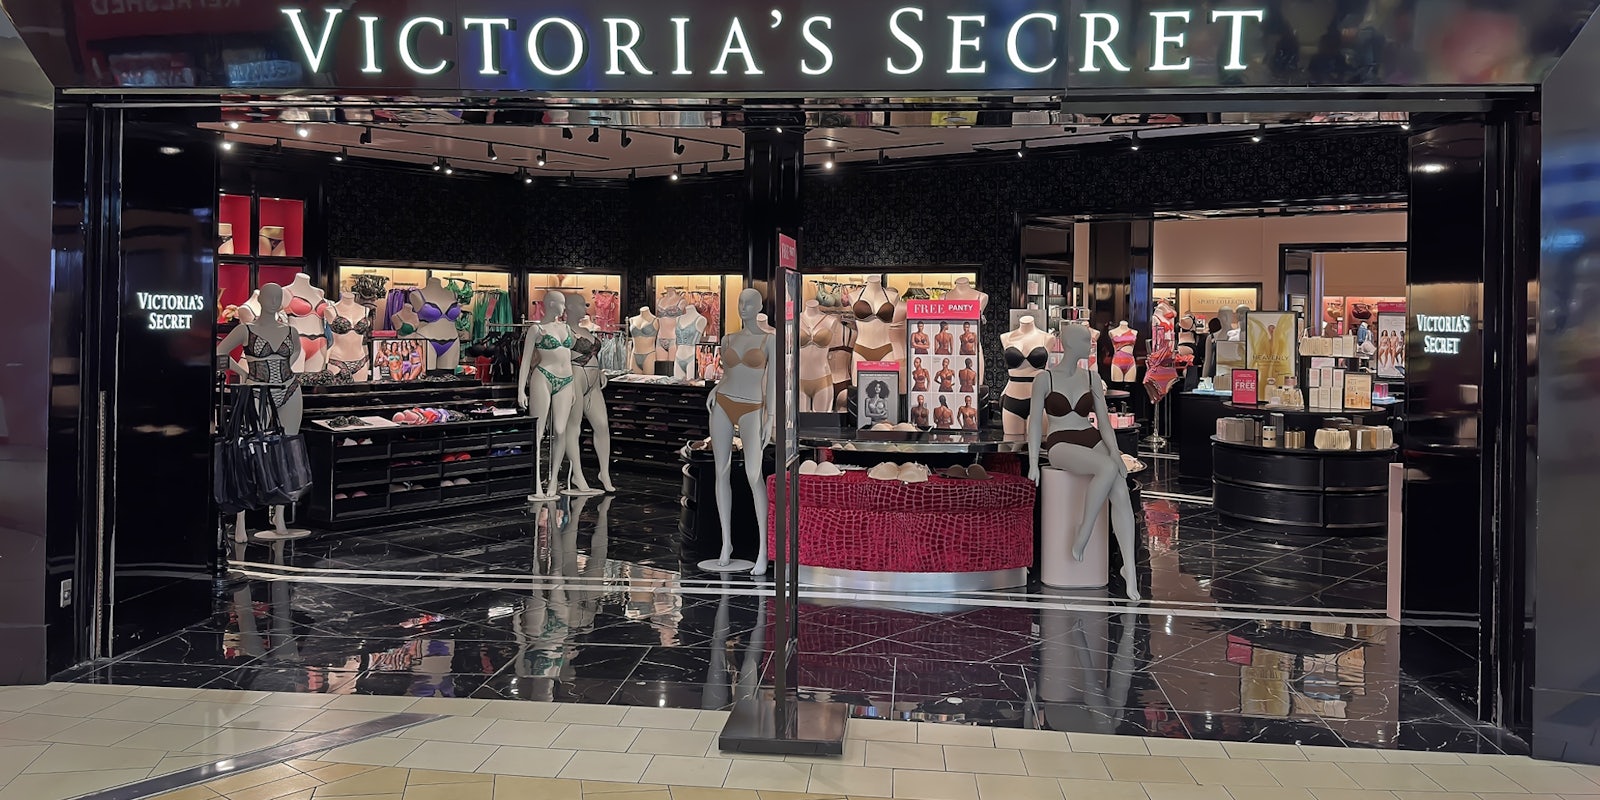 Victoria's Secret PINK - We're counting down to dressing up